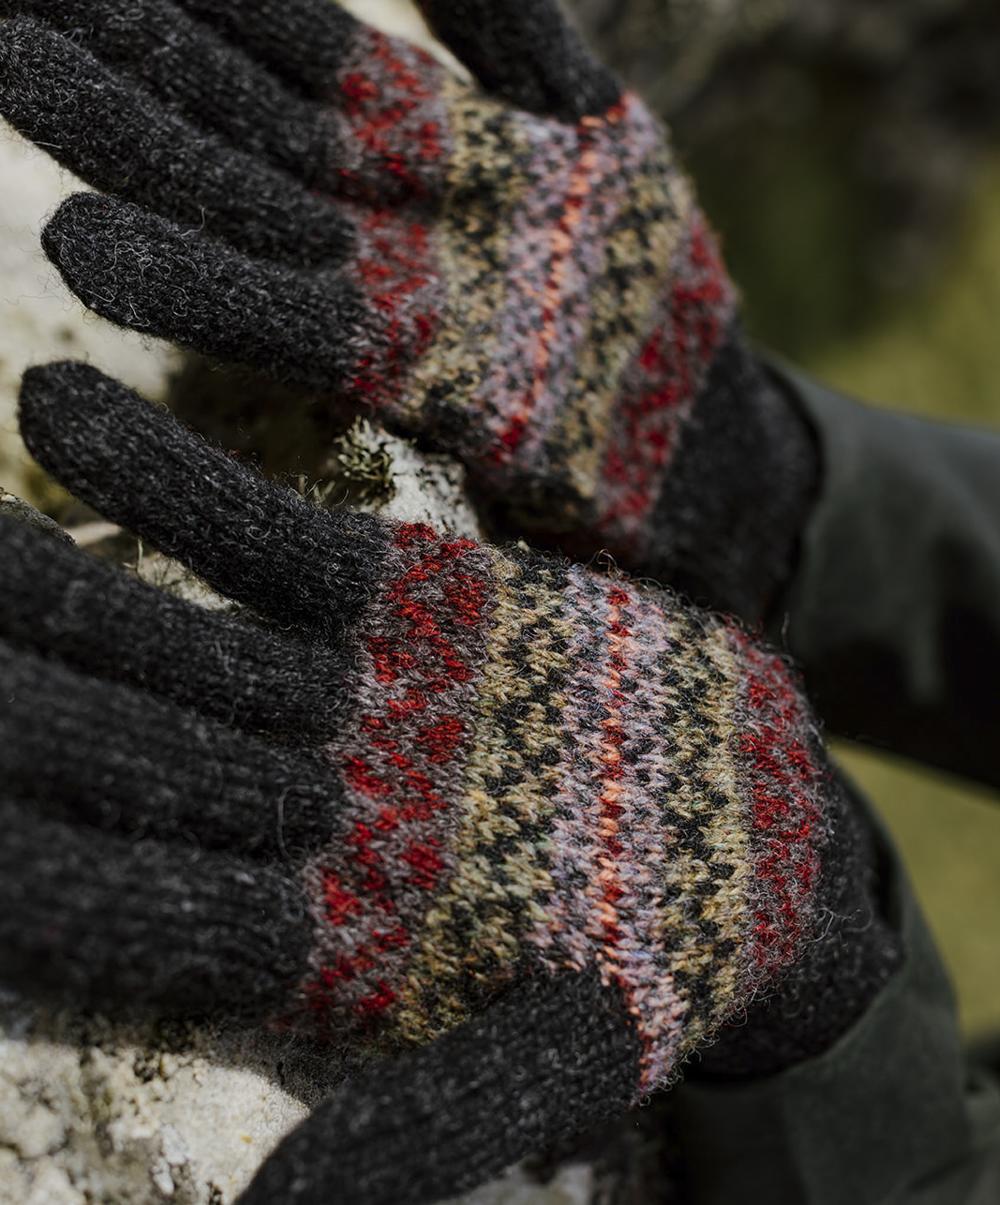 Hands are open on a lichen-covered wall; the hands wear gloves in a deep charcoal shade with richly-patterned hands and palms